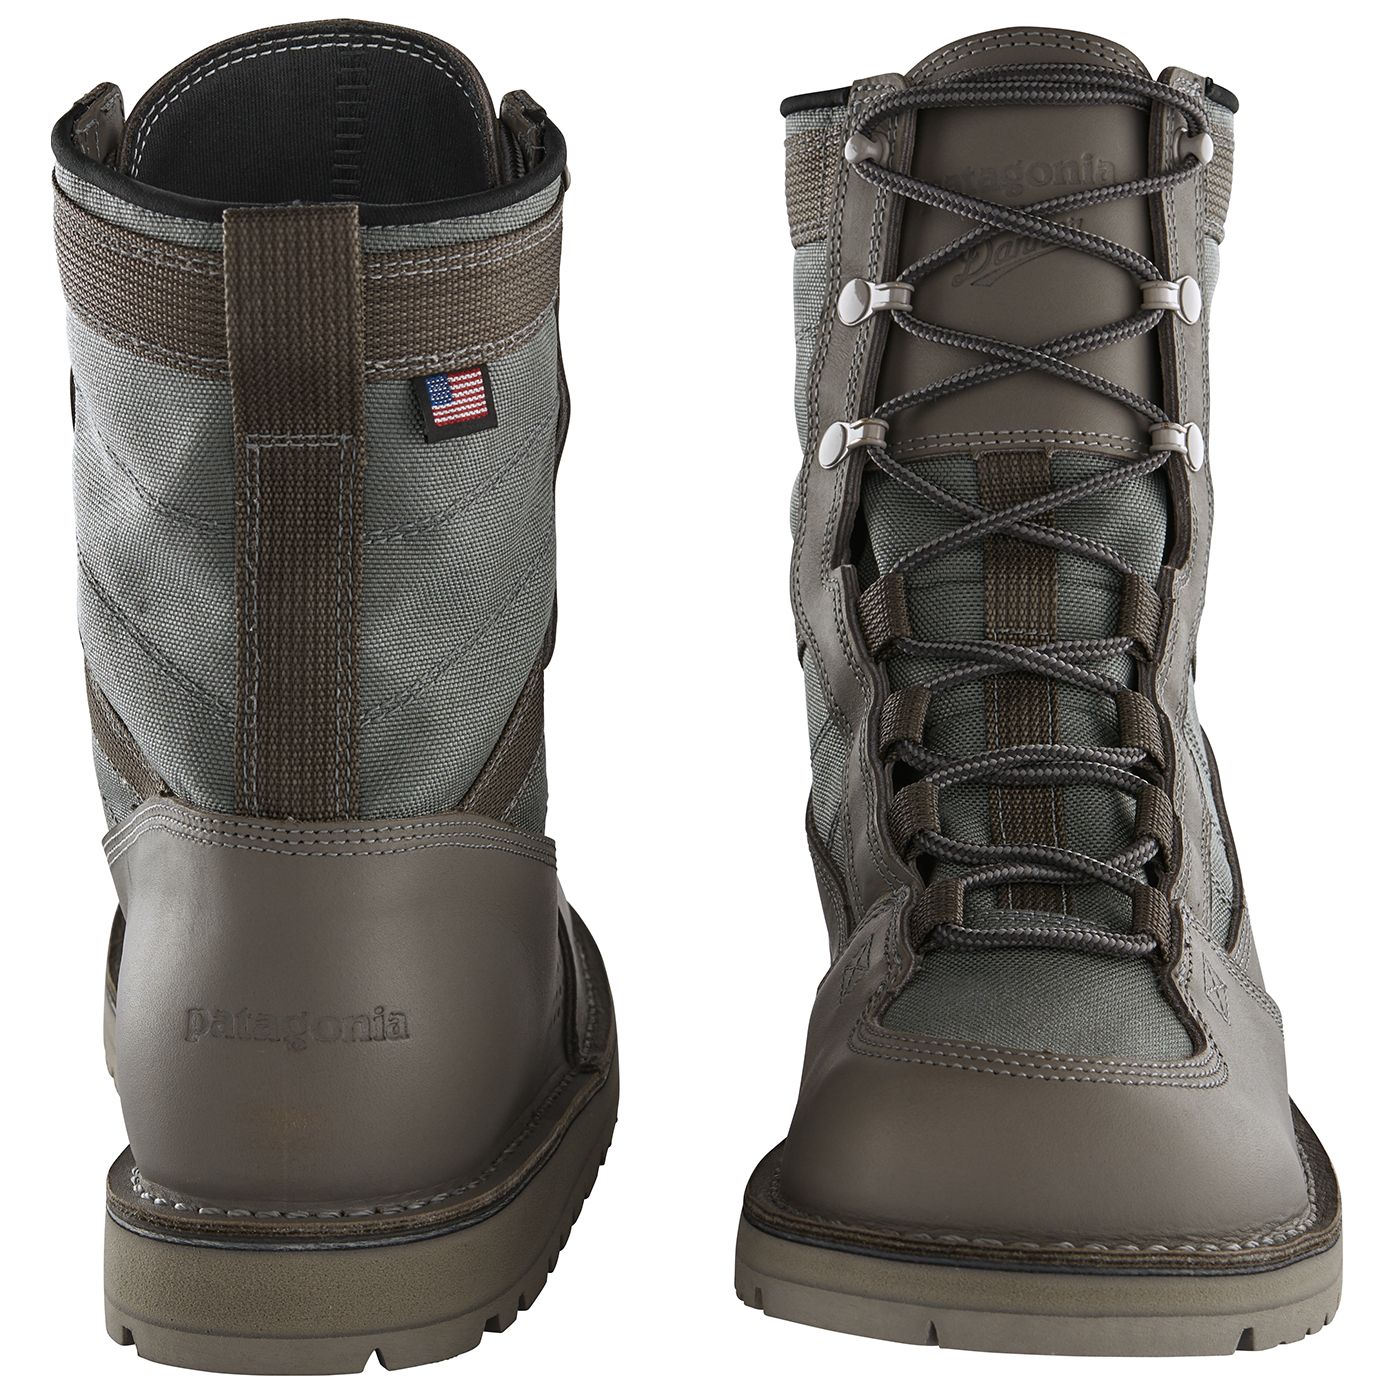 Patagonia River Salt Wading Boots Feather Grey Image 02